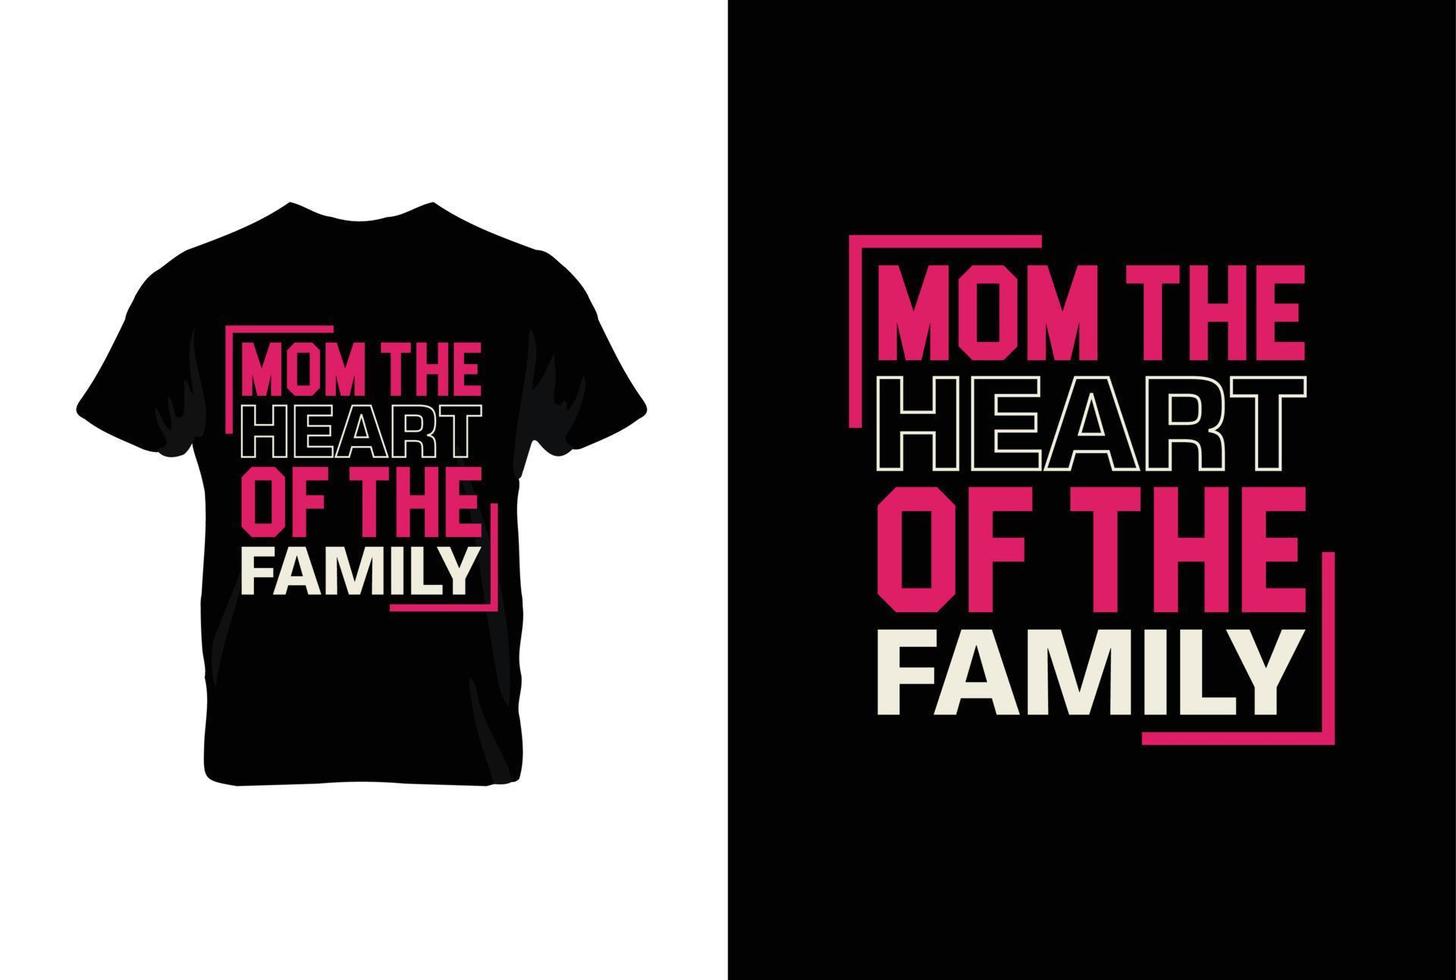 Mom The Heart Of The Family. Mothers day t shirt design best selling t-shirt design typography creative custom, t-shirt design vector